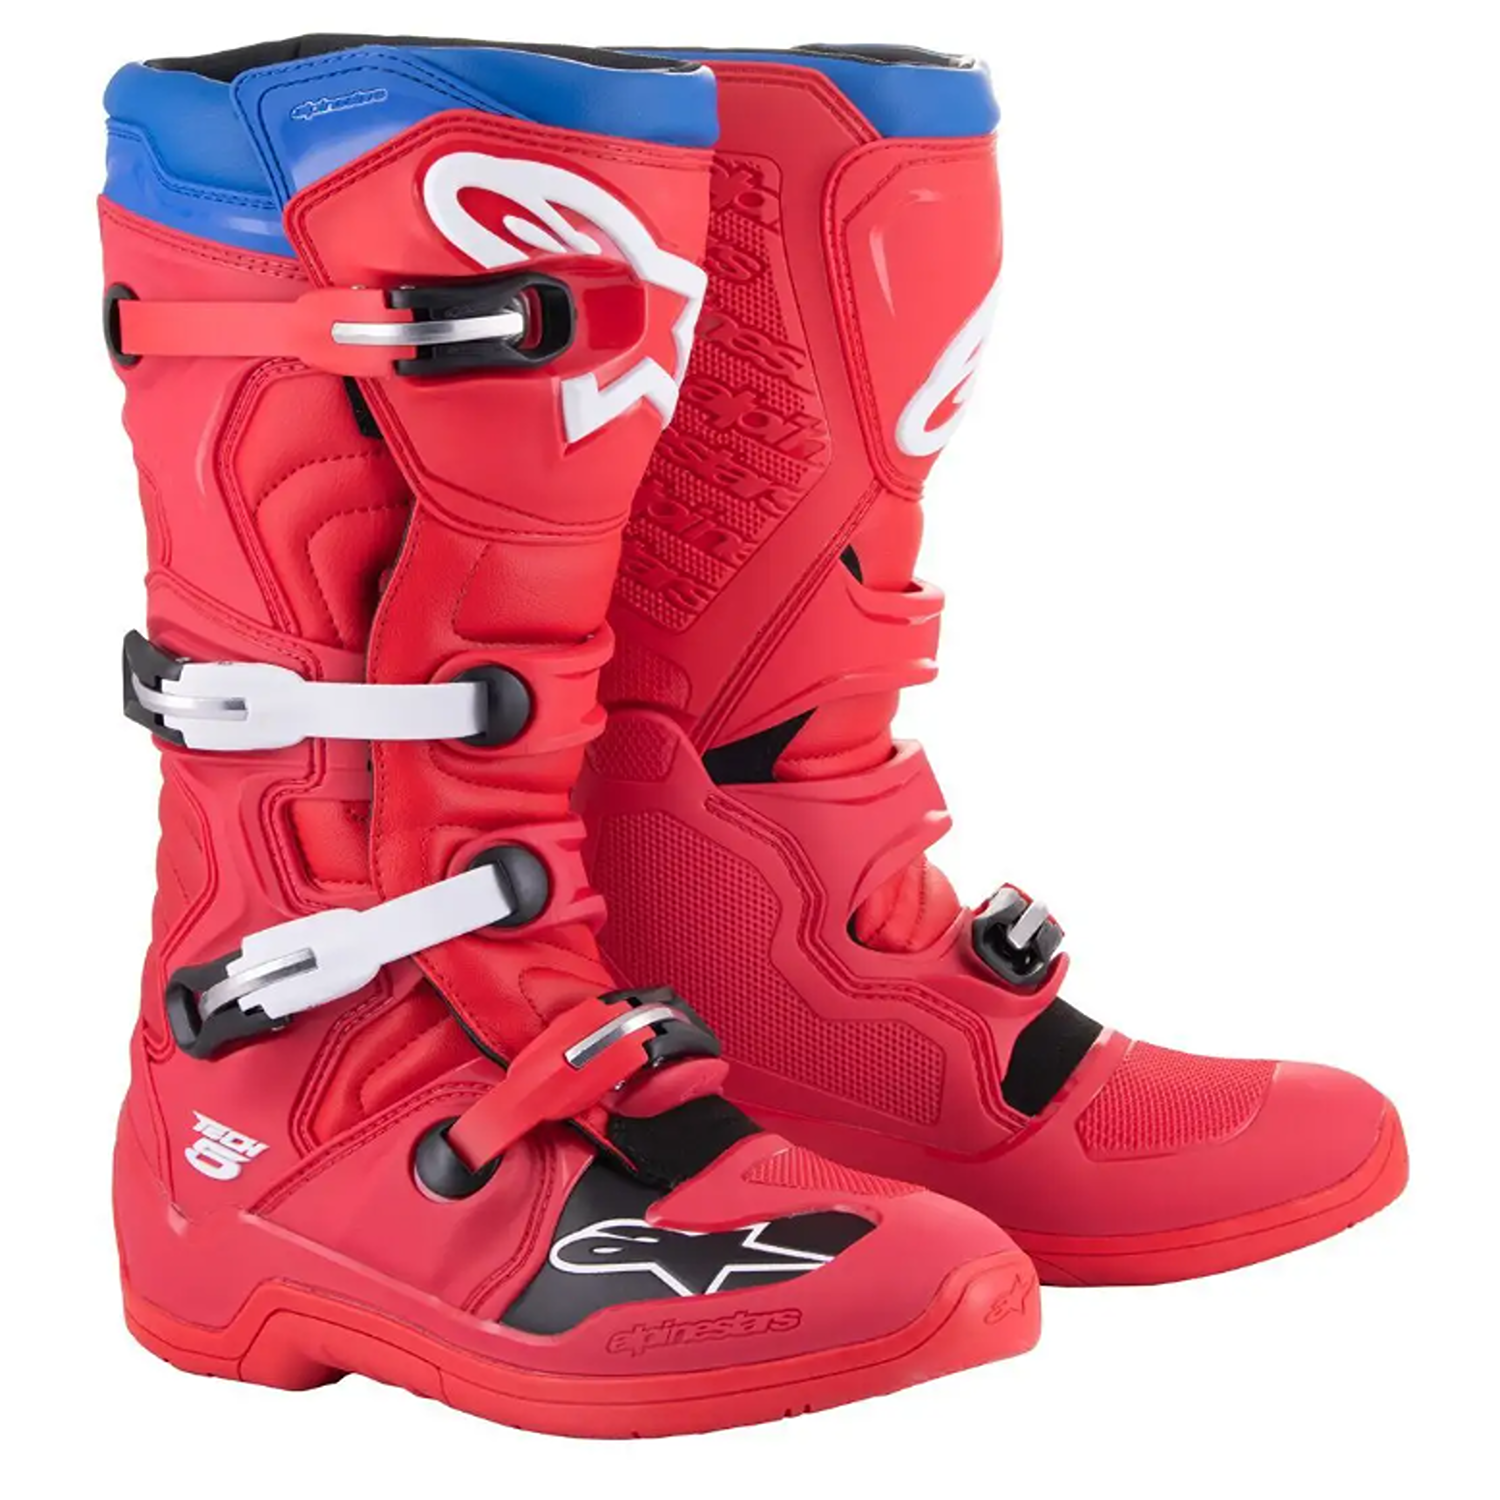 Image of Alpinestars Tech 5 Boots Bright Red Dark Red Blue Taille US 10